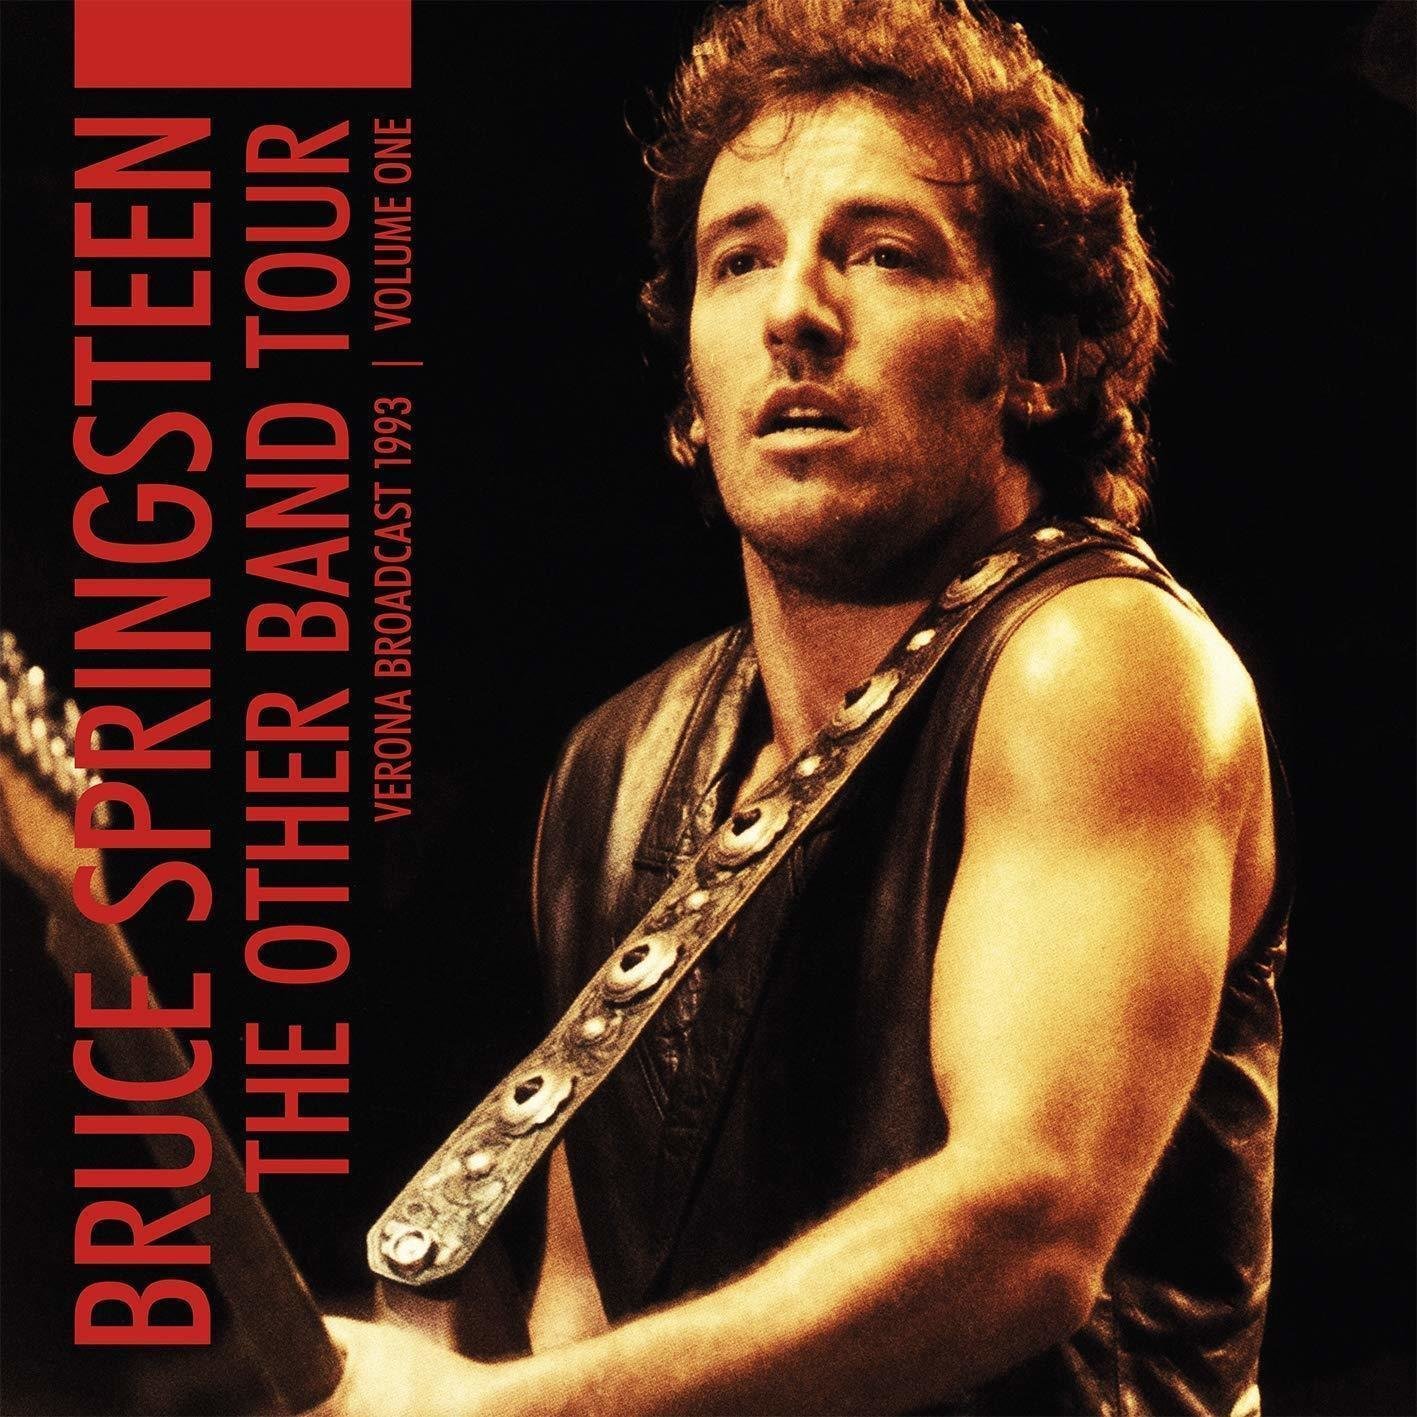 LP ploča Bruce Springsteen - The Other Band Tour - Verona Broadcast 1993 - Volume One (2 LP)